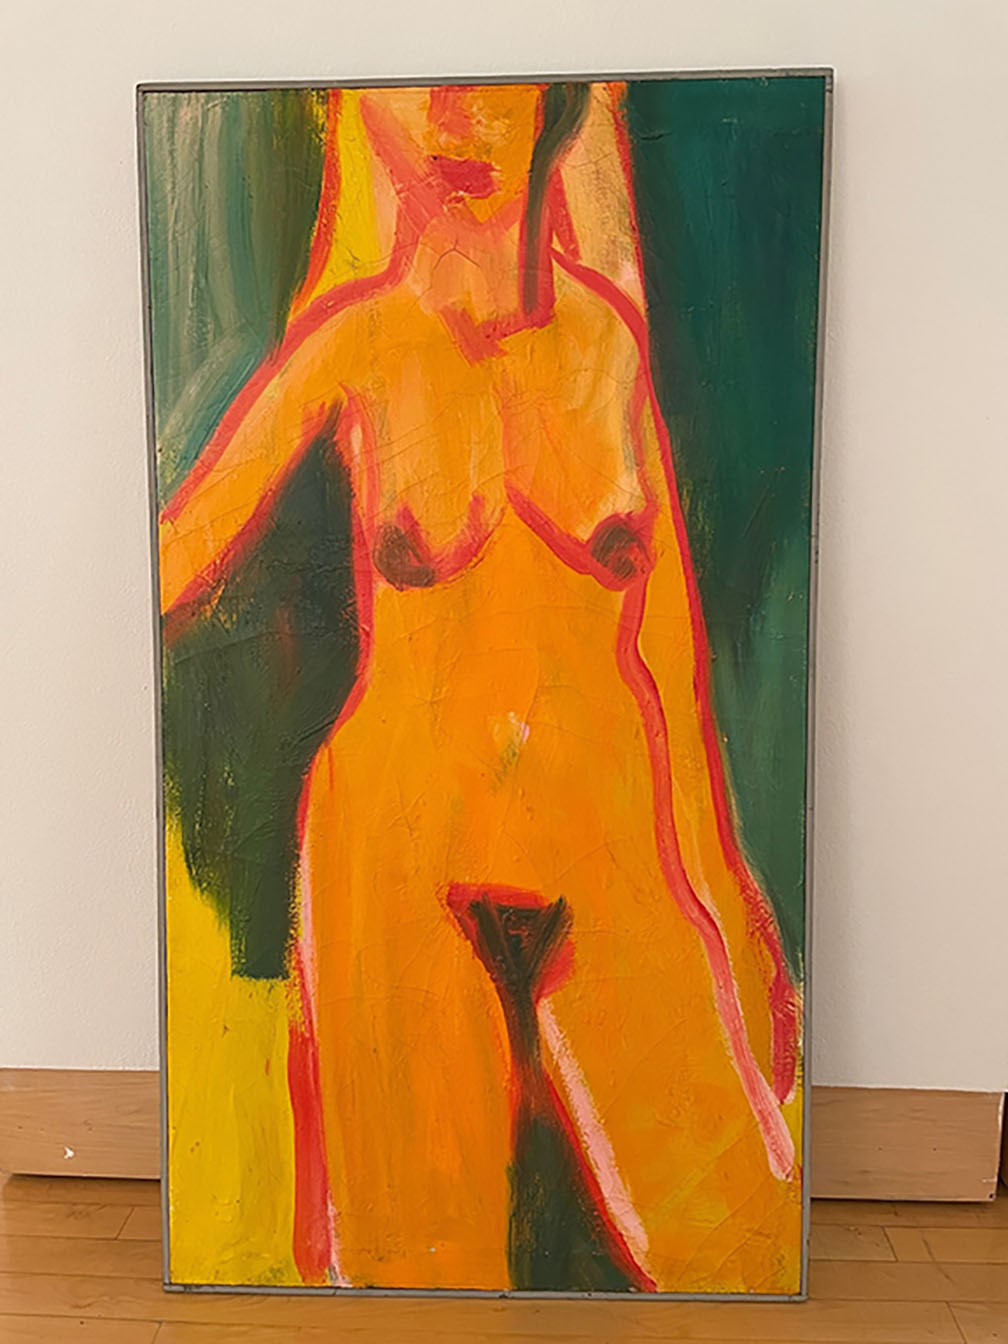 "Nude Oil" by Don Vogl, oil on canvas